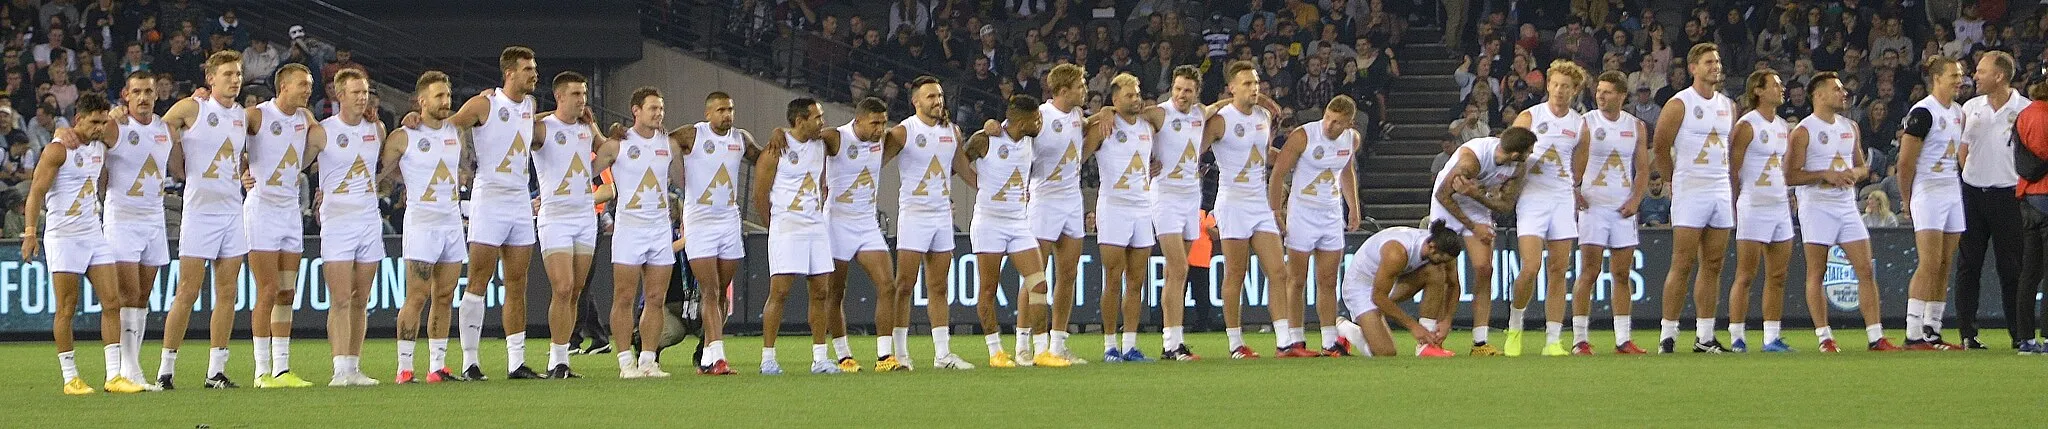 Photo showing: The Allies  at the AFL State of Origin for Bushfire Relief Match at Marvel Stadium in February 2020.